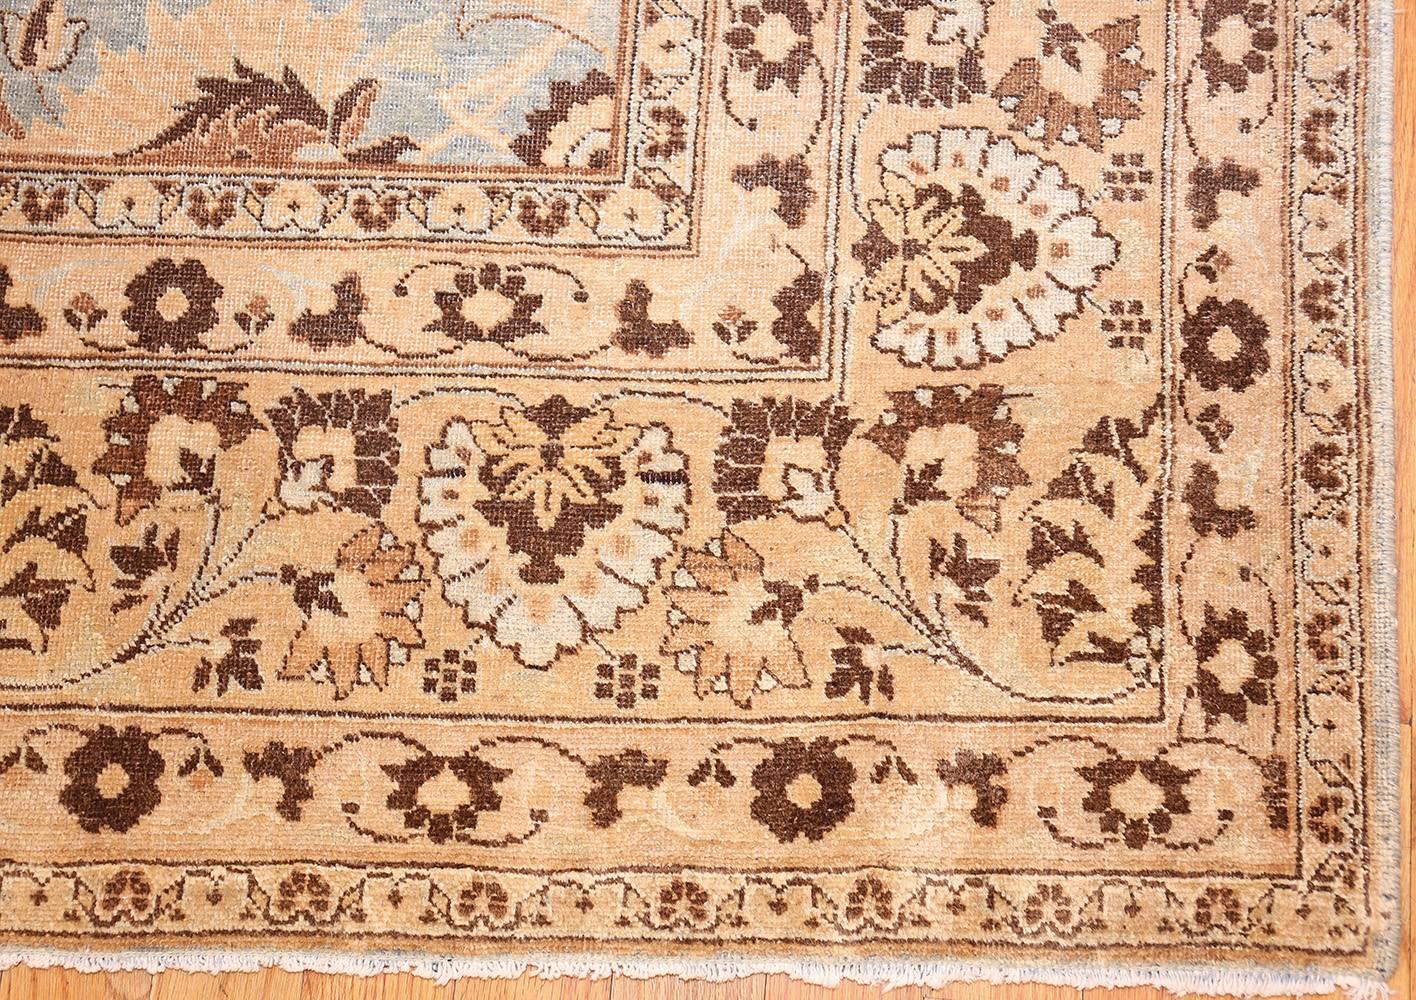 Hand-Knotted Nazmiyal Collection Antique Persian Khorassan Rug. Size: 11 ft 9 in x 15 ft